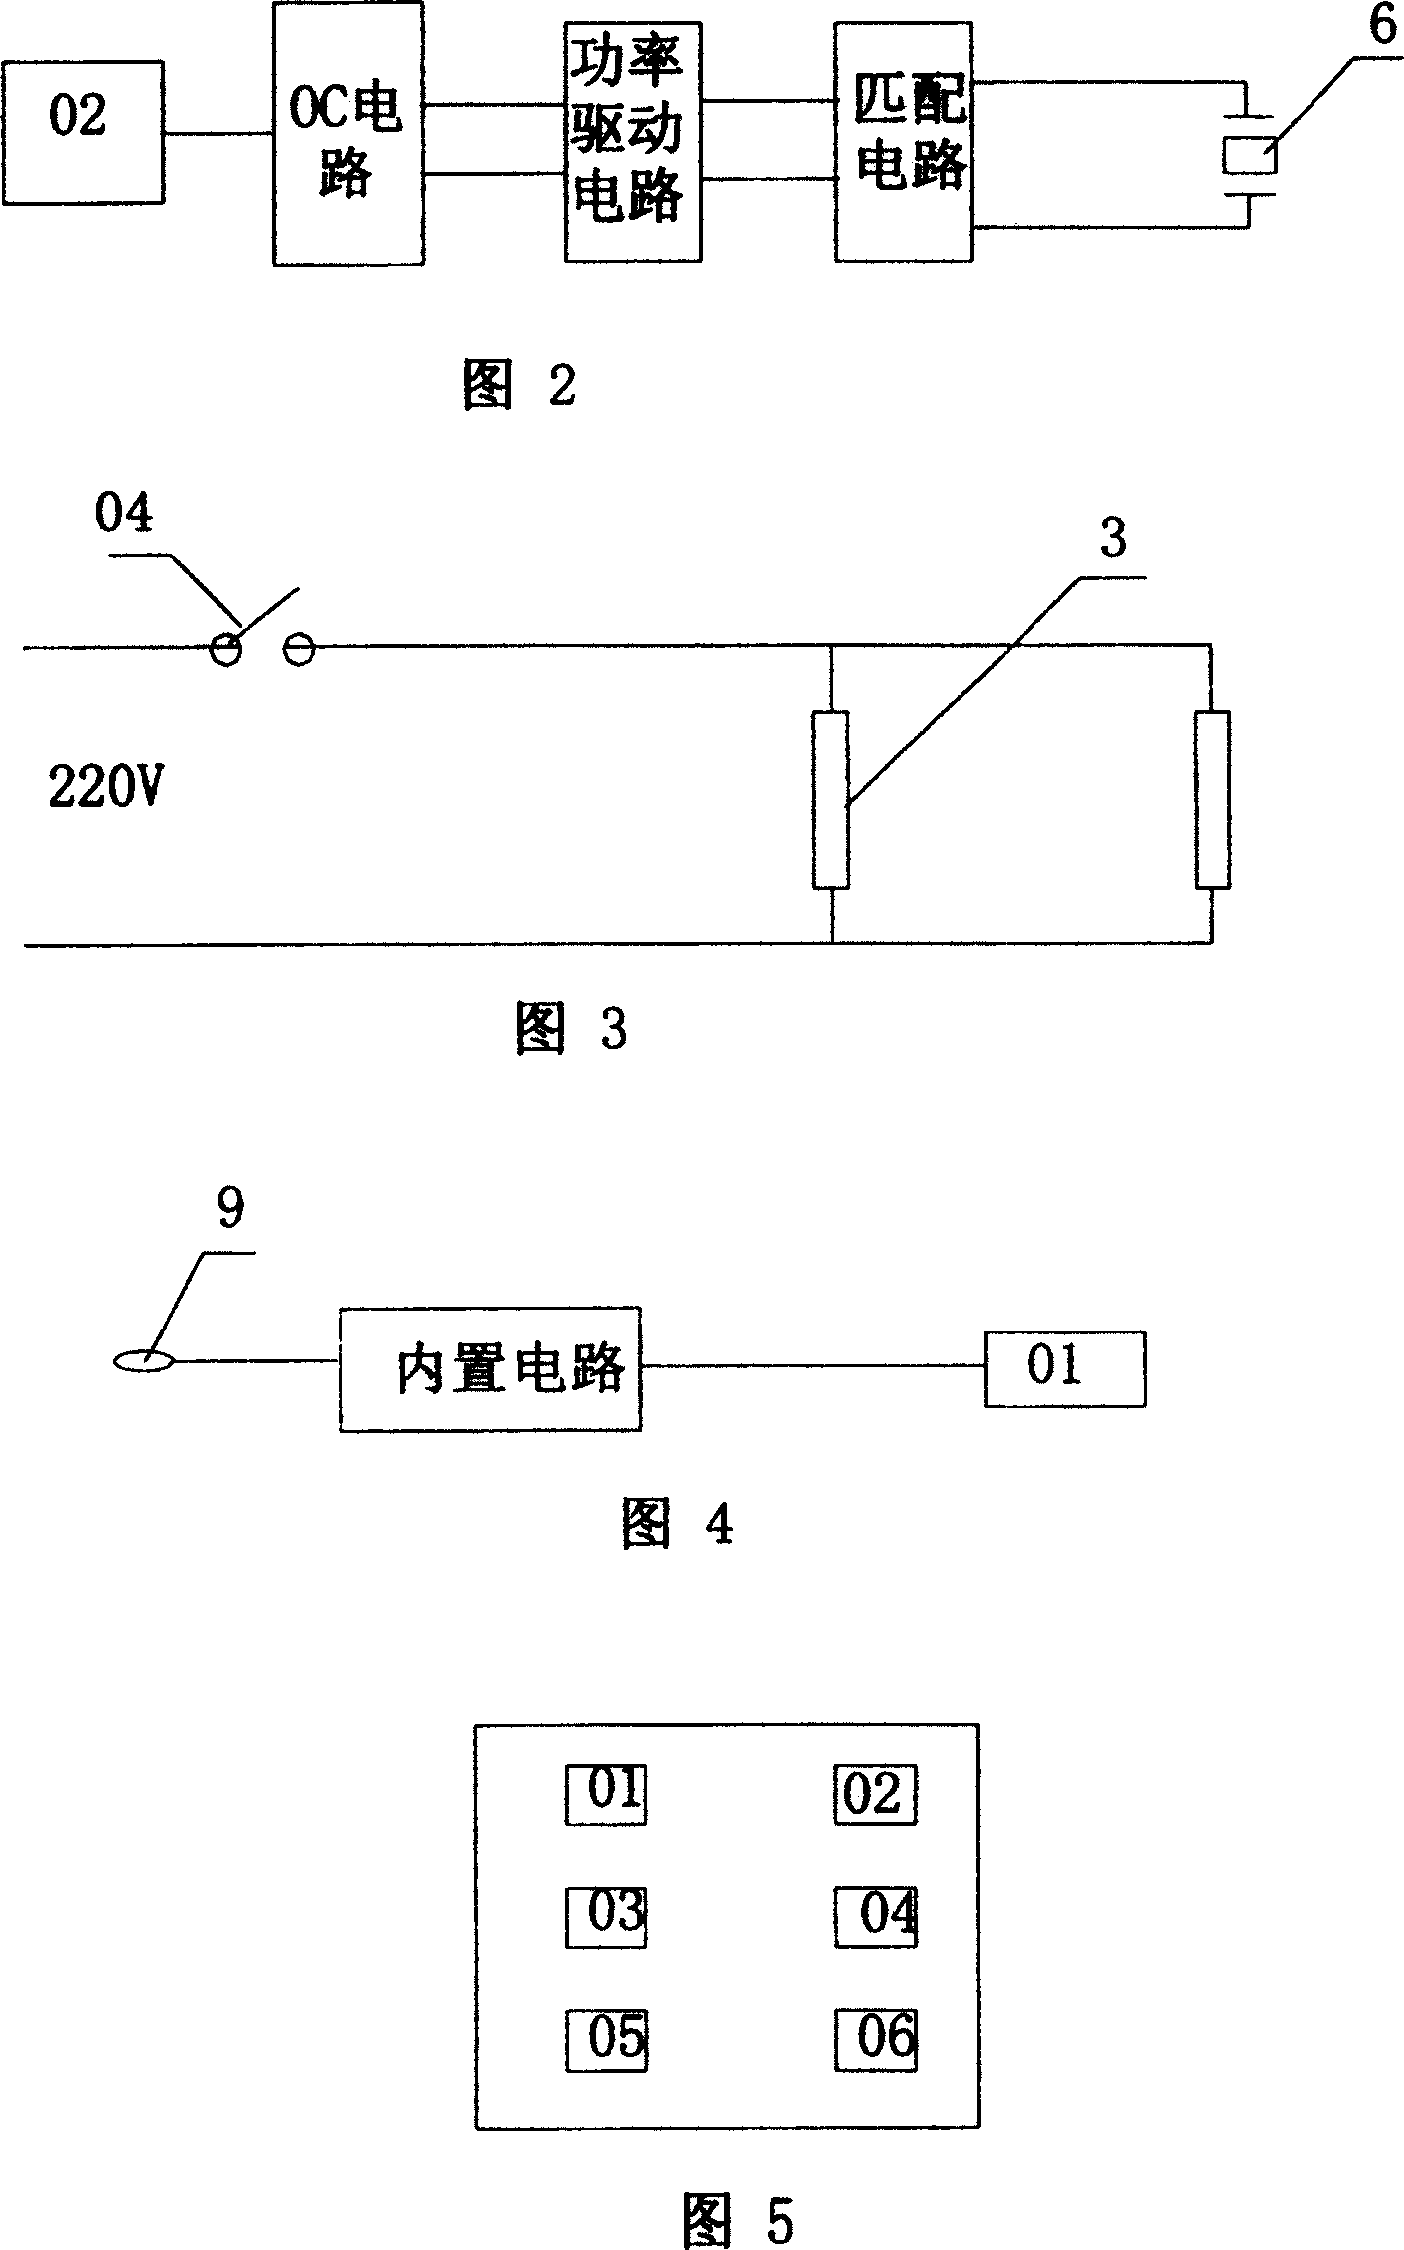 Method and apparatus for producing thick oil based on sound, light and electricity combination function